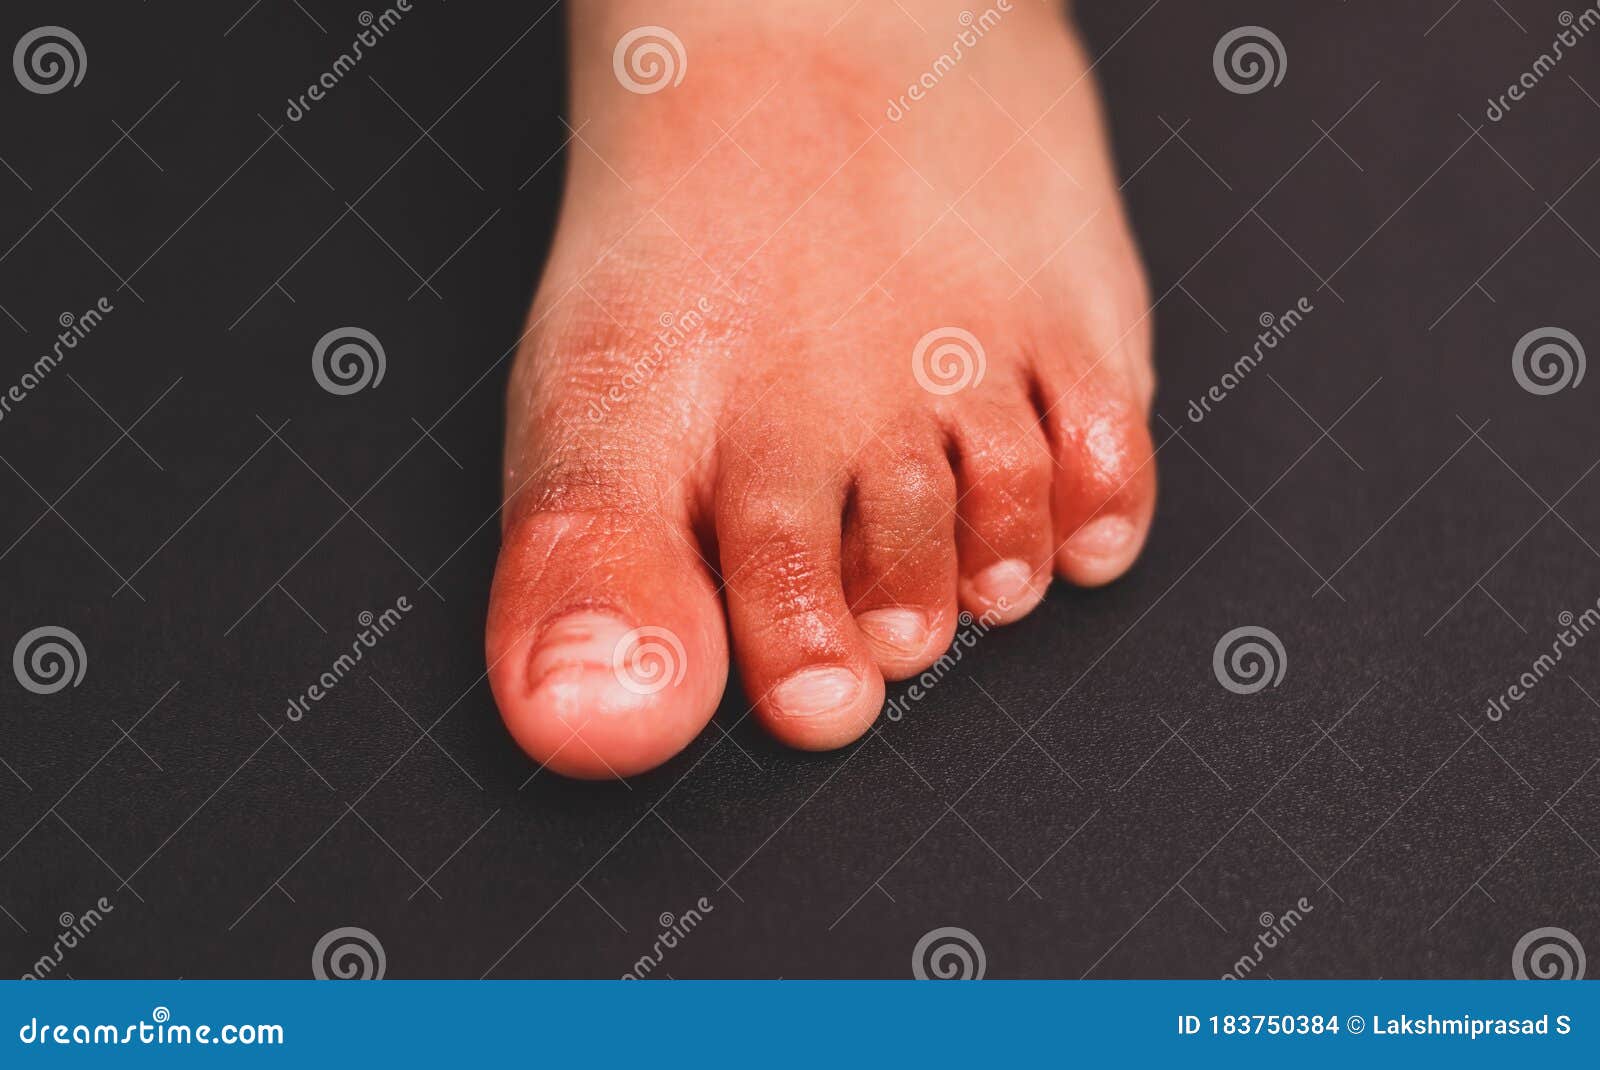 painful red inflammation on toe called covid toe lesions strange sign of new coronavirus symptoms or infections